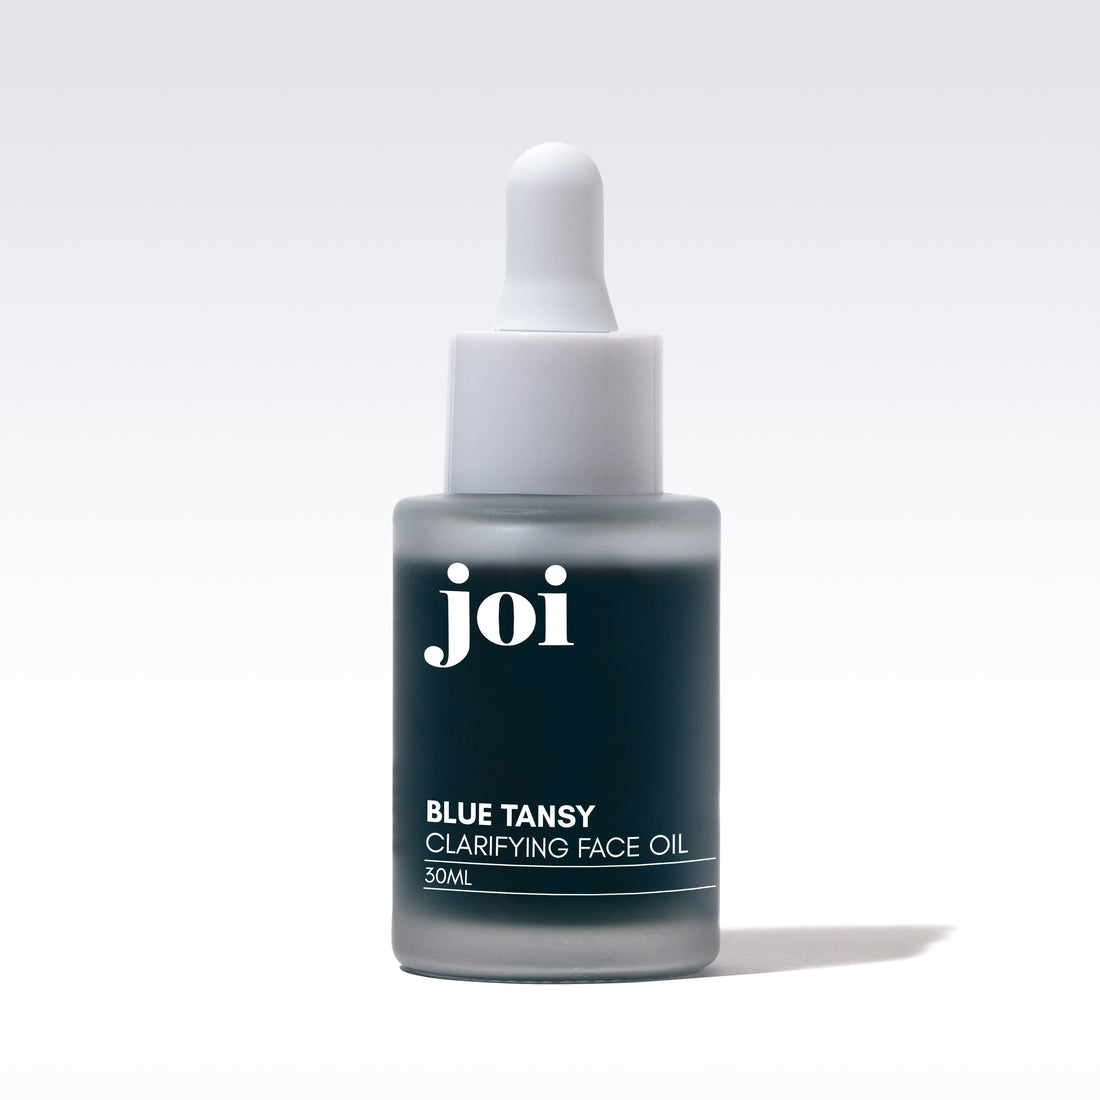 Blue Tansy Clarifying Face Oil